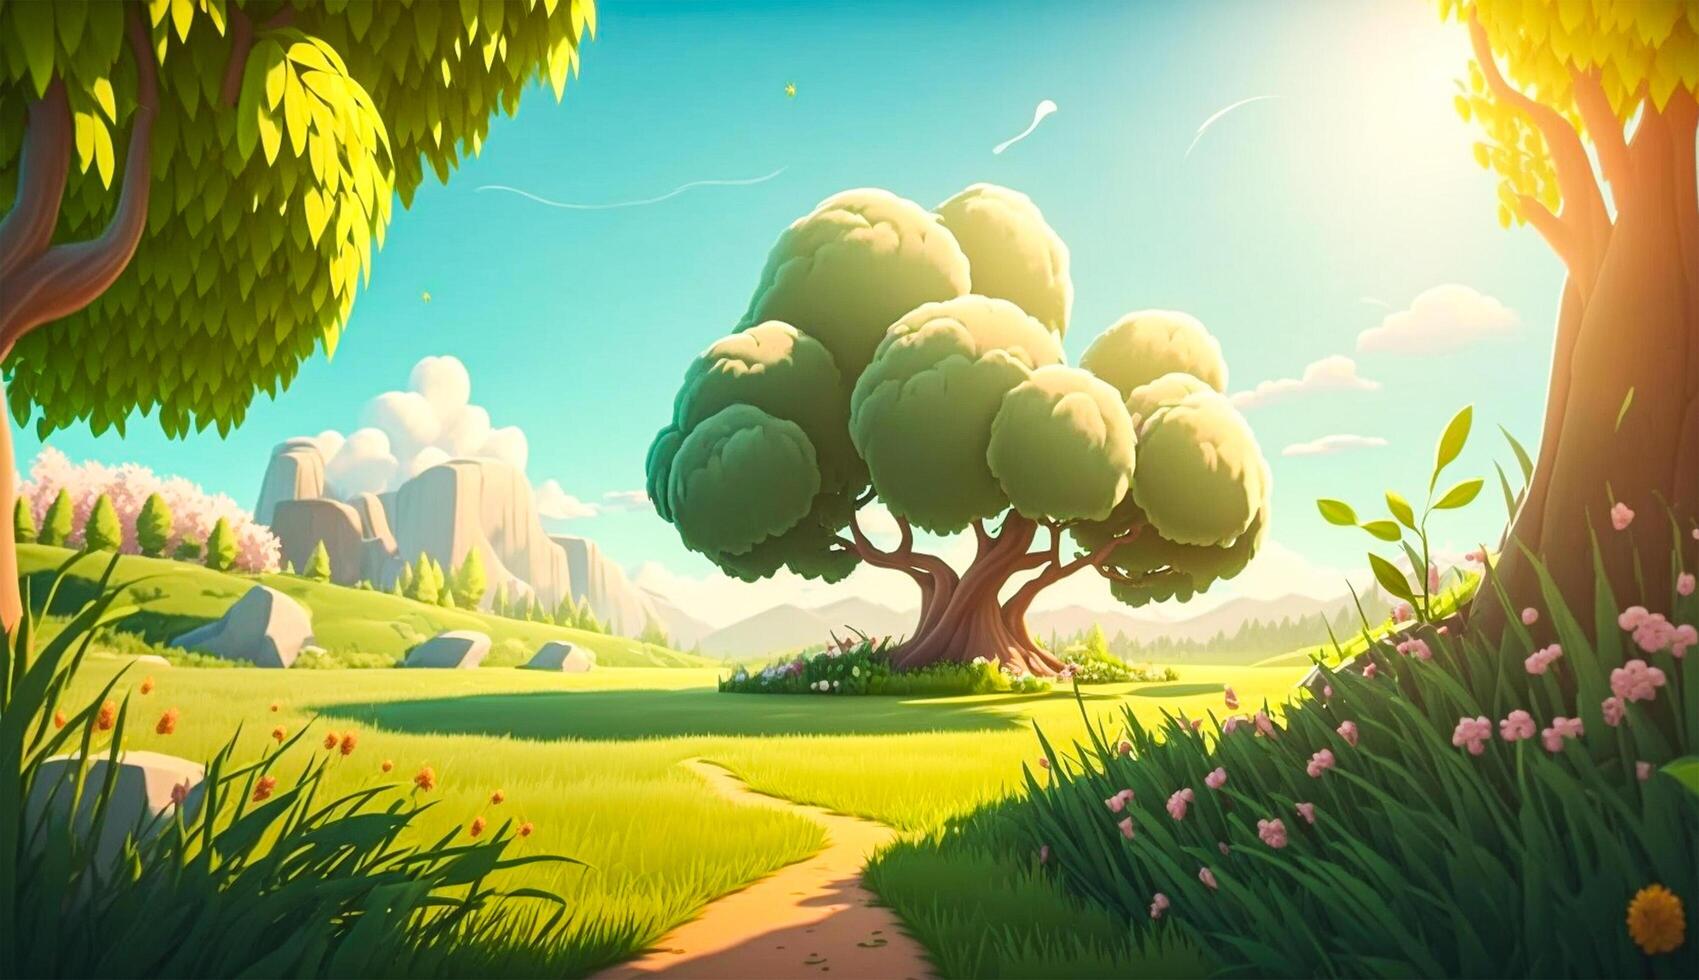 Nature landscape with trees, flowers, hills, and sunlight. Beautiful environment concept art for video games or fiction. Sunny spring forest background. Cute illustration by . Free image. photo